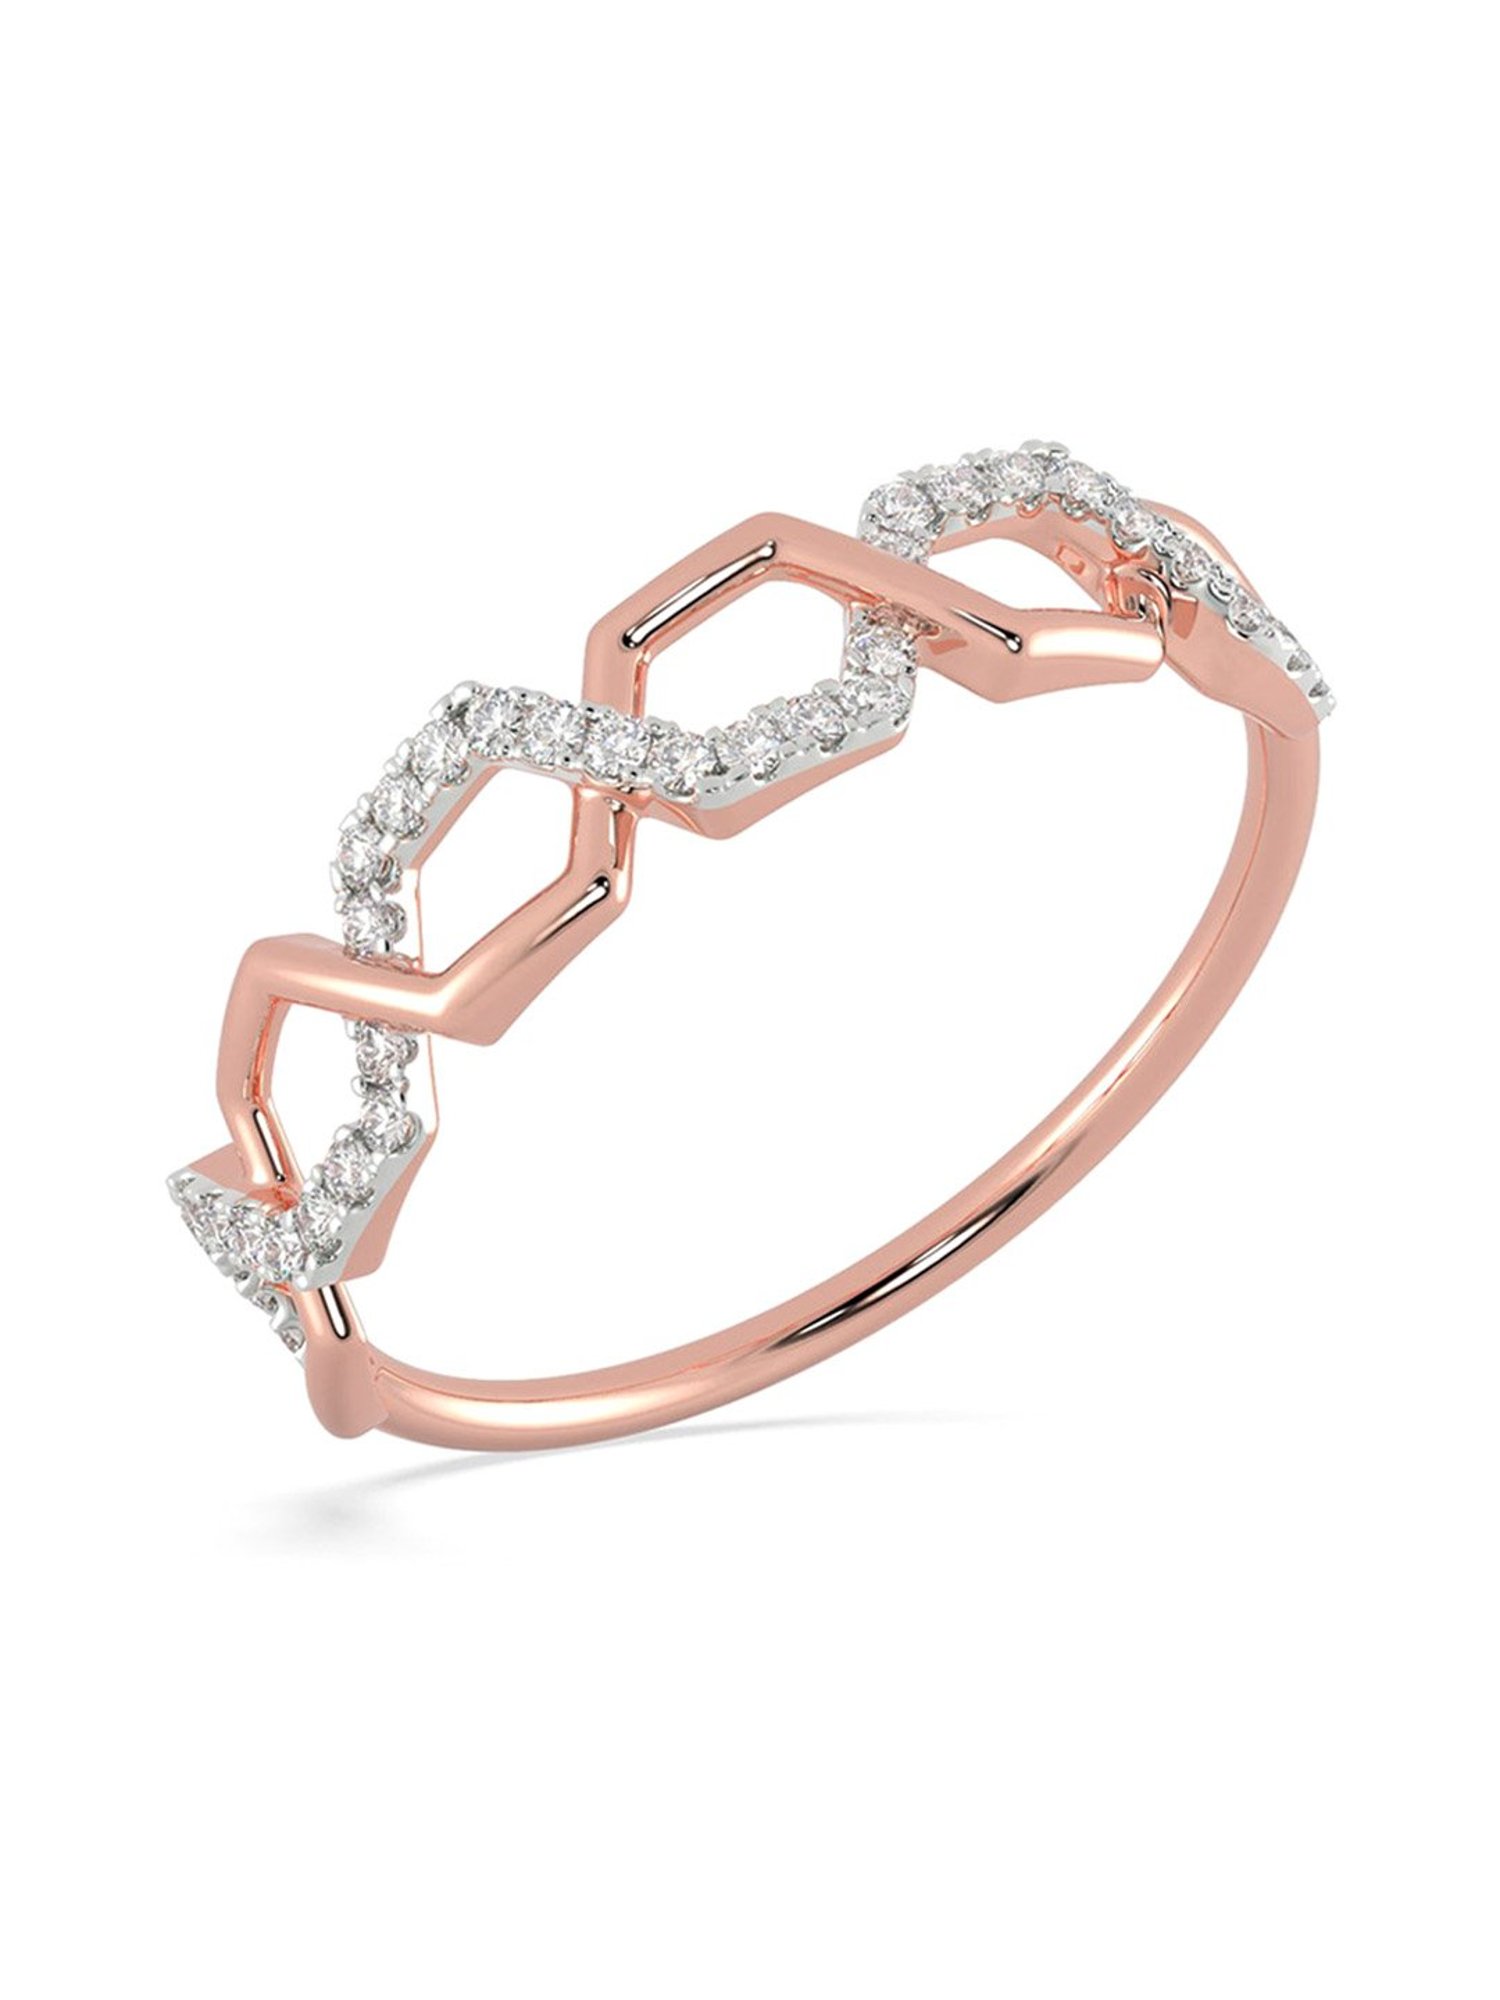 ChenFeng Rose gold ring Grown Halo Engagement Ring For Women Ideal Engagement  Ring (6) | Amazon.com